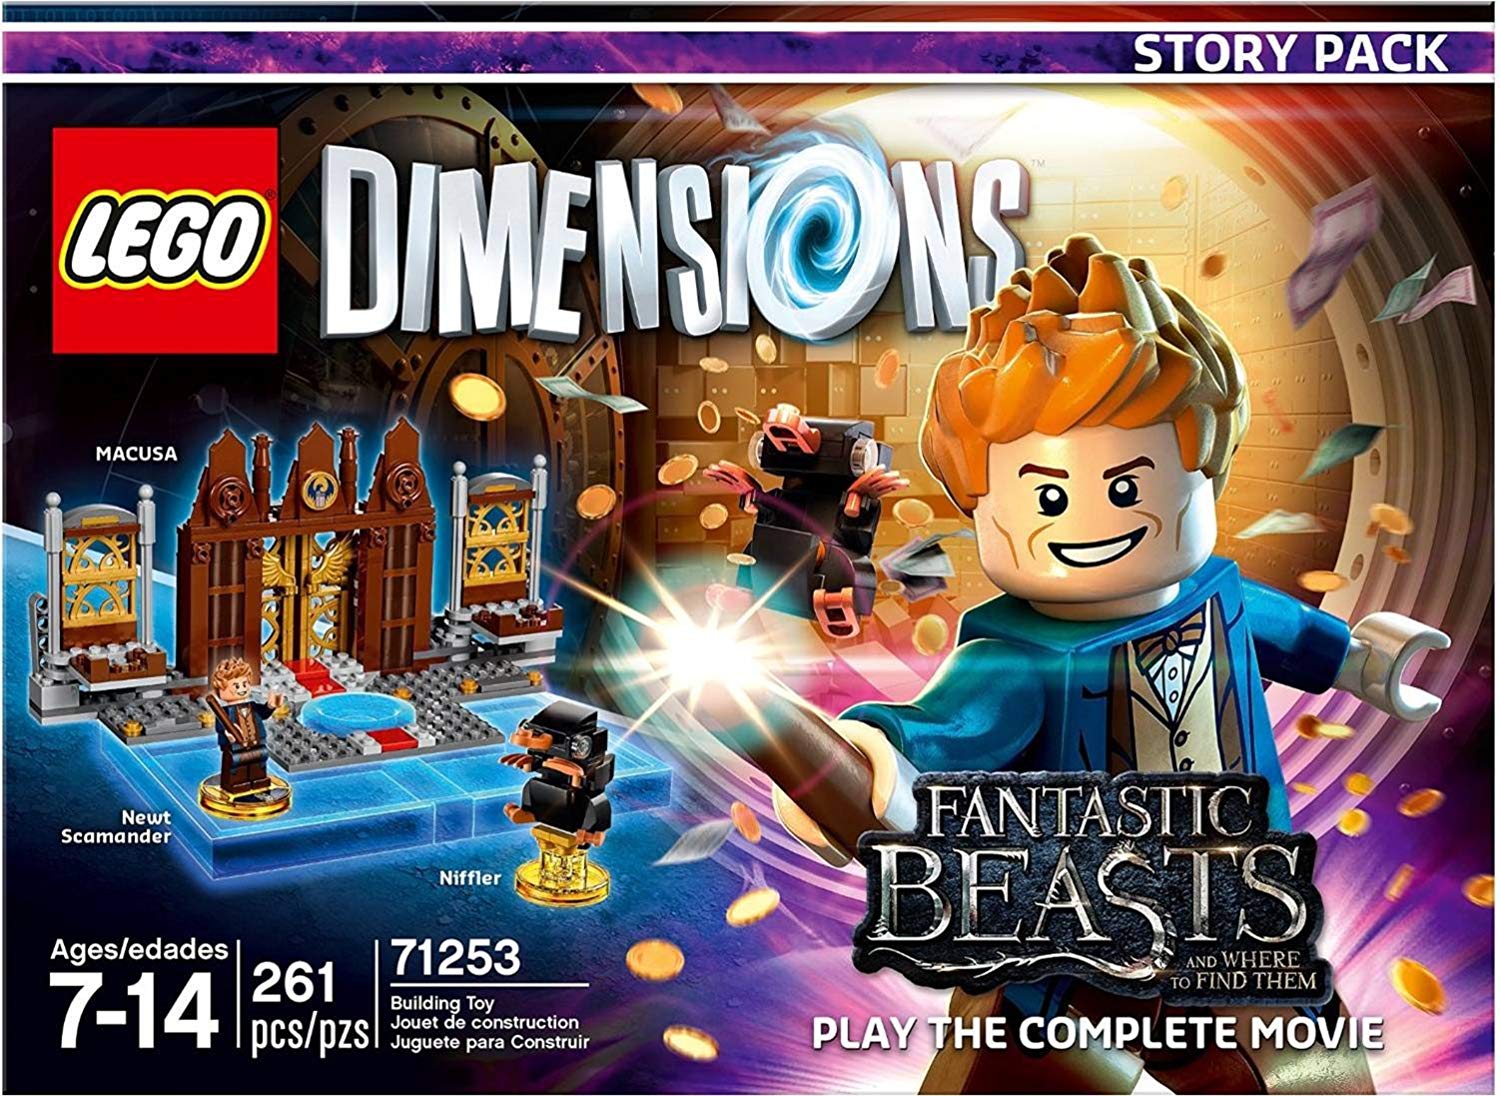 Fantastic Beasts and Where to Find Them Story Pack (71253)